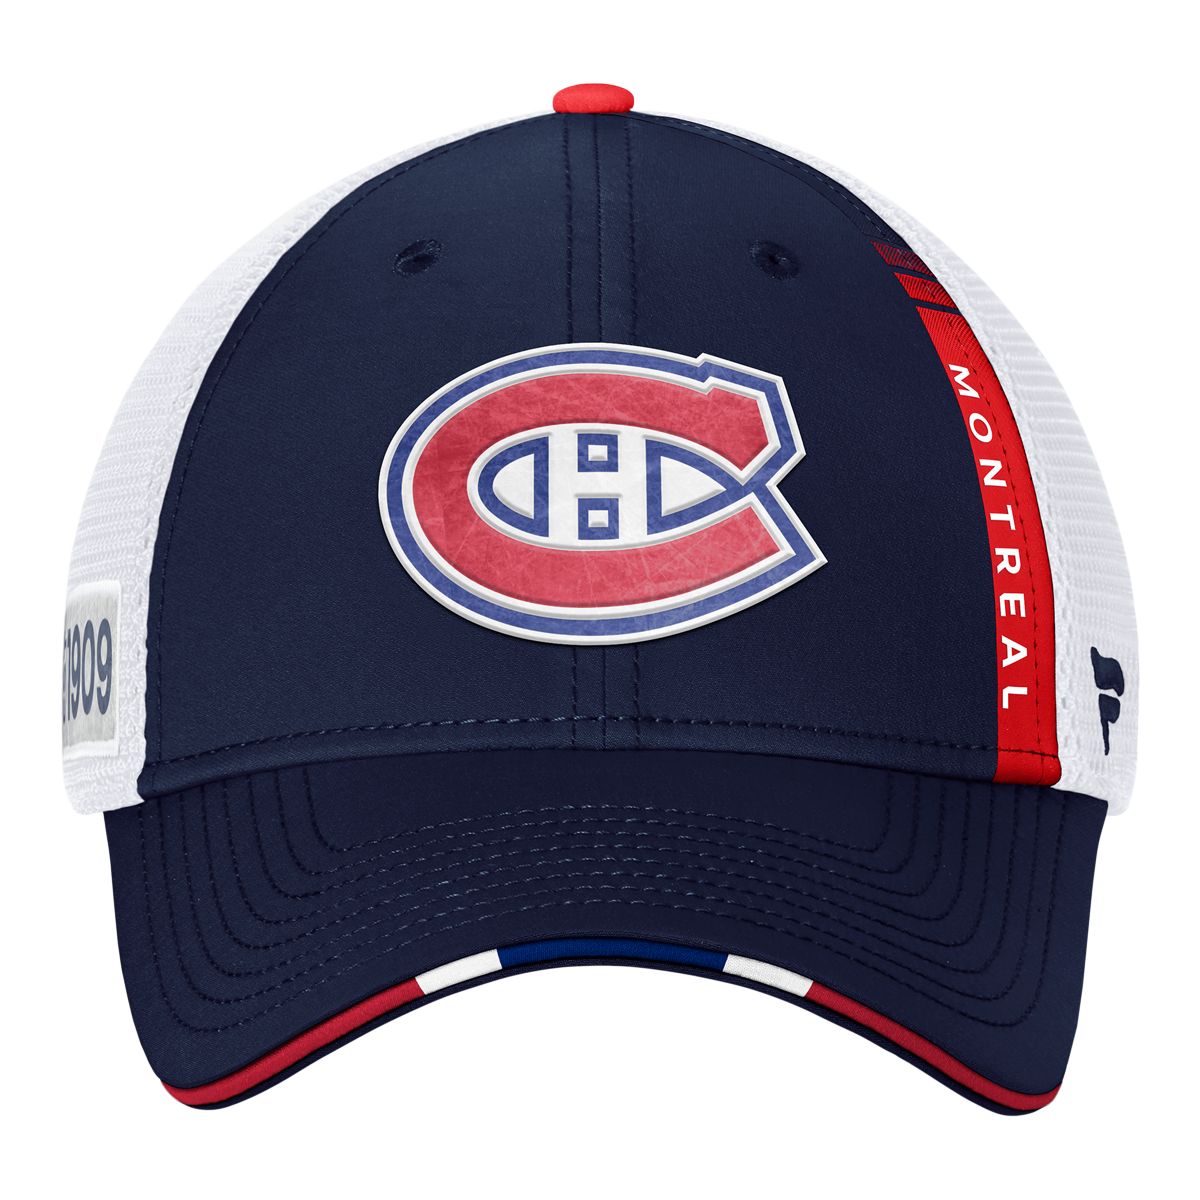 Club 1909 - The official rewards program of the Montreal Canadiens